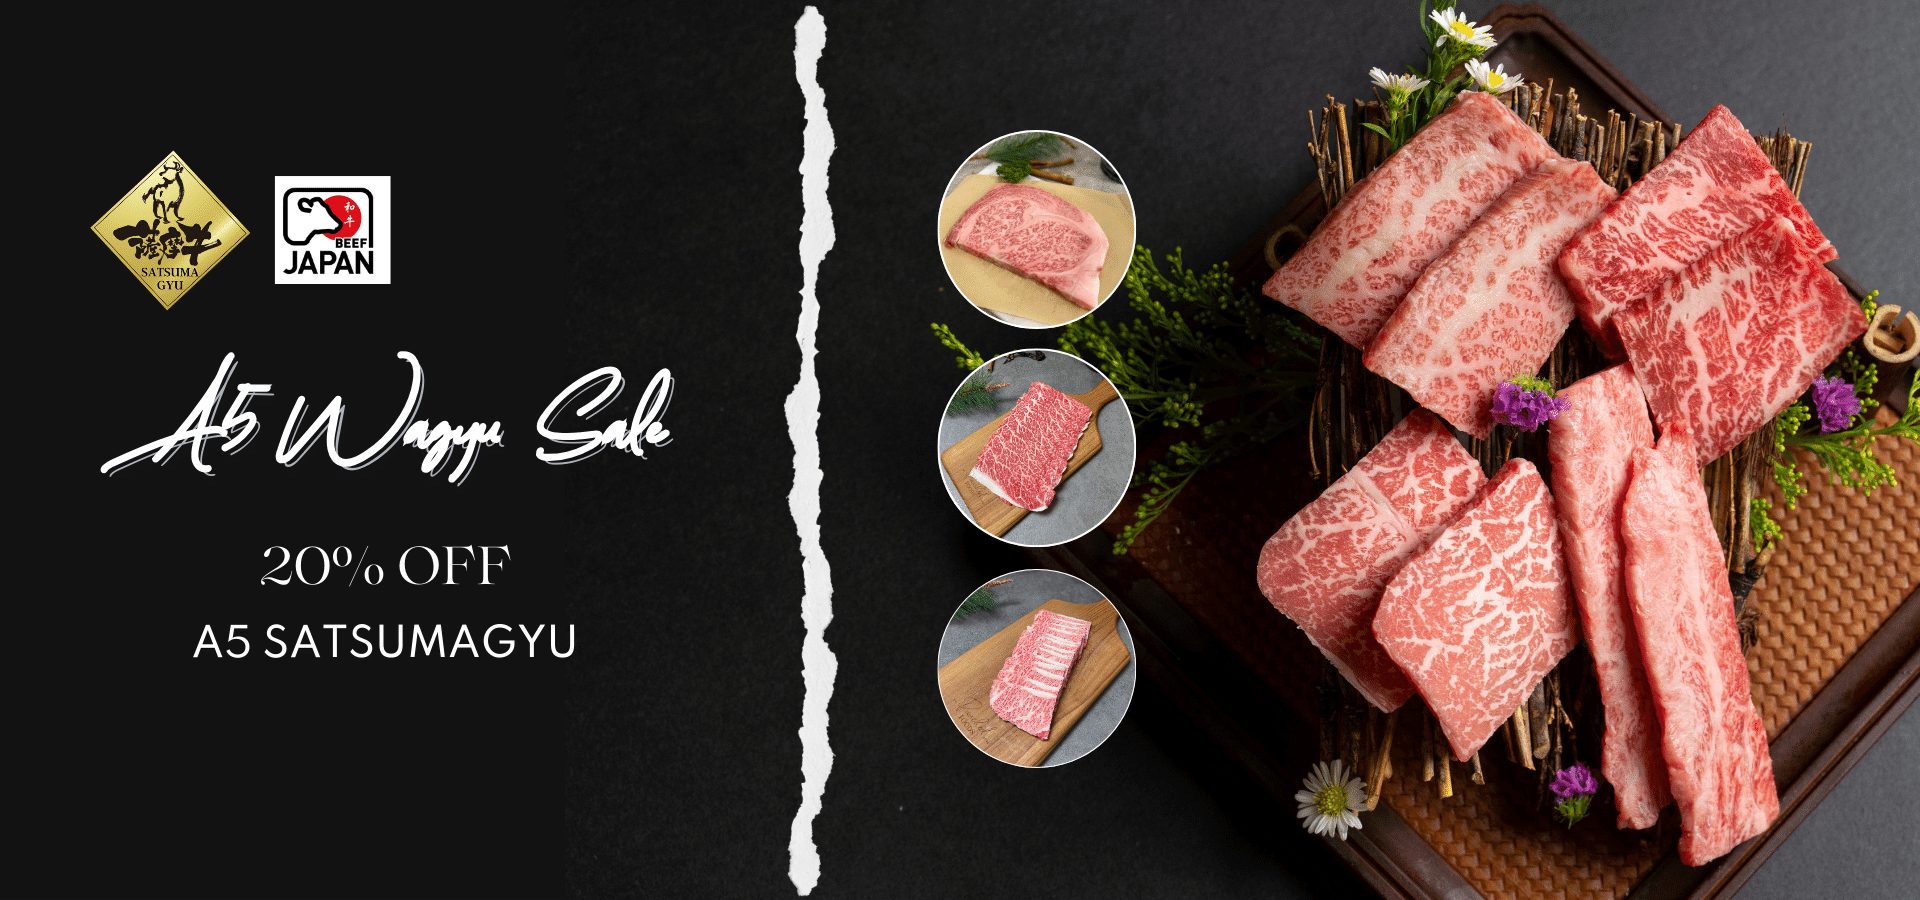 Website Banner - A5 Wagyu Promo 20% off (Mobile)